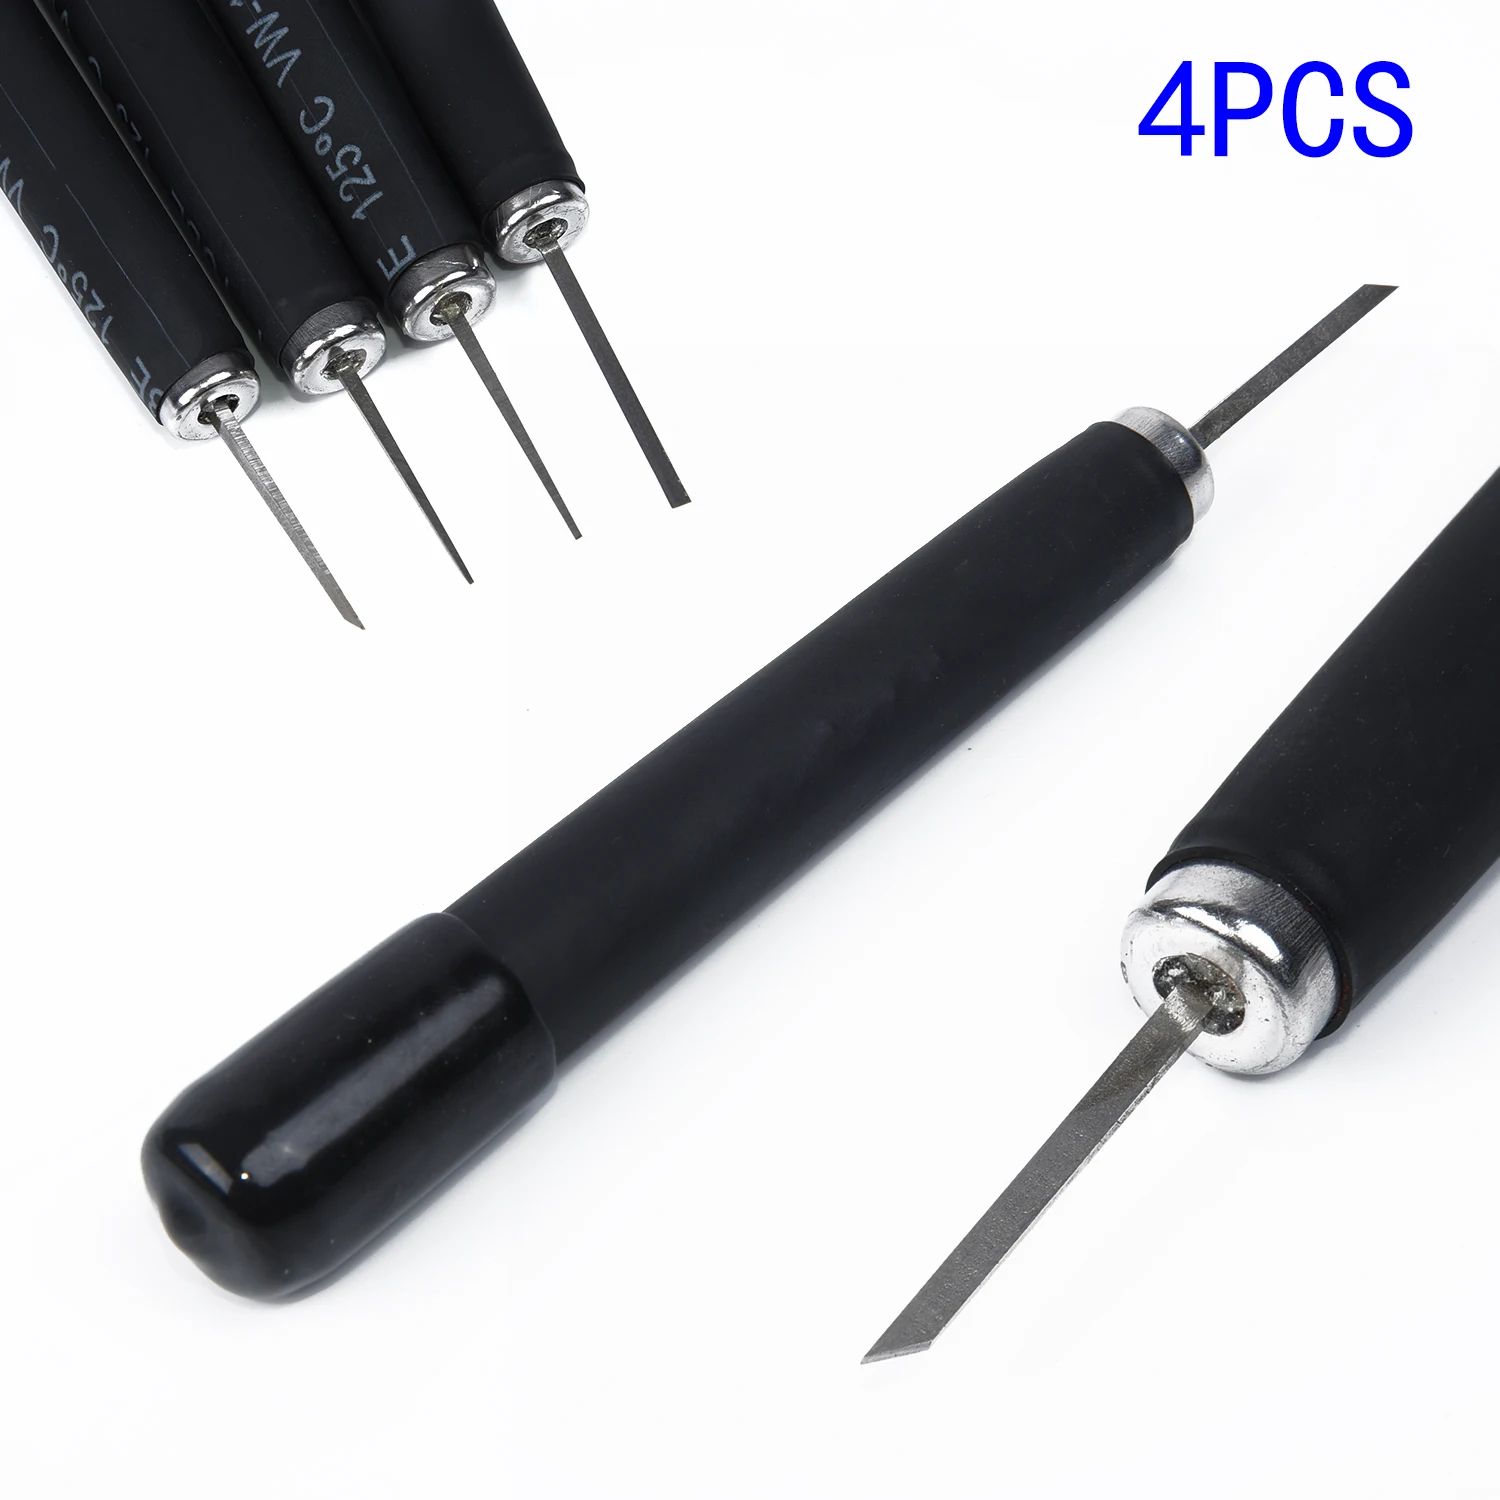 4pcs Set 0.4-2mm Modeling Tools Accessory Scriber Crafts Tool Scribe Line Chisel